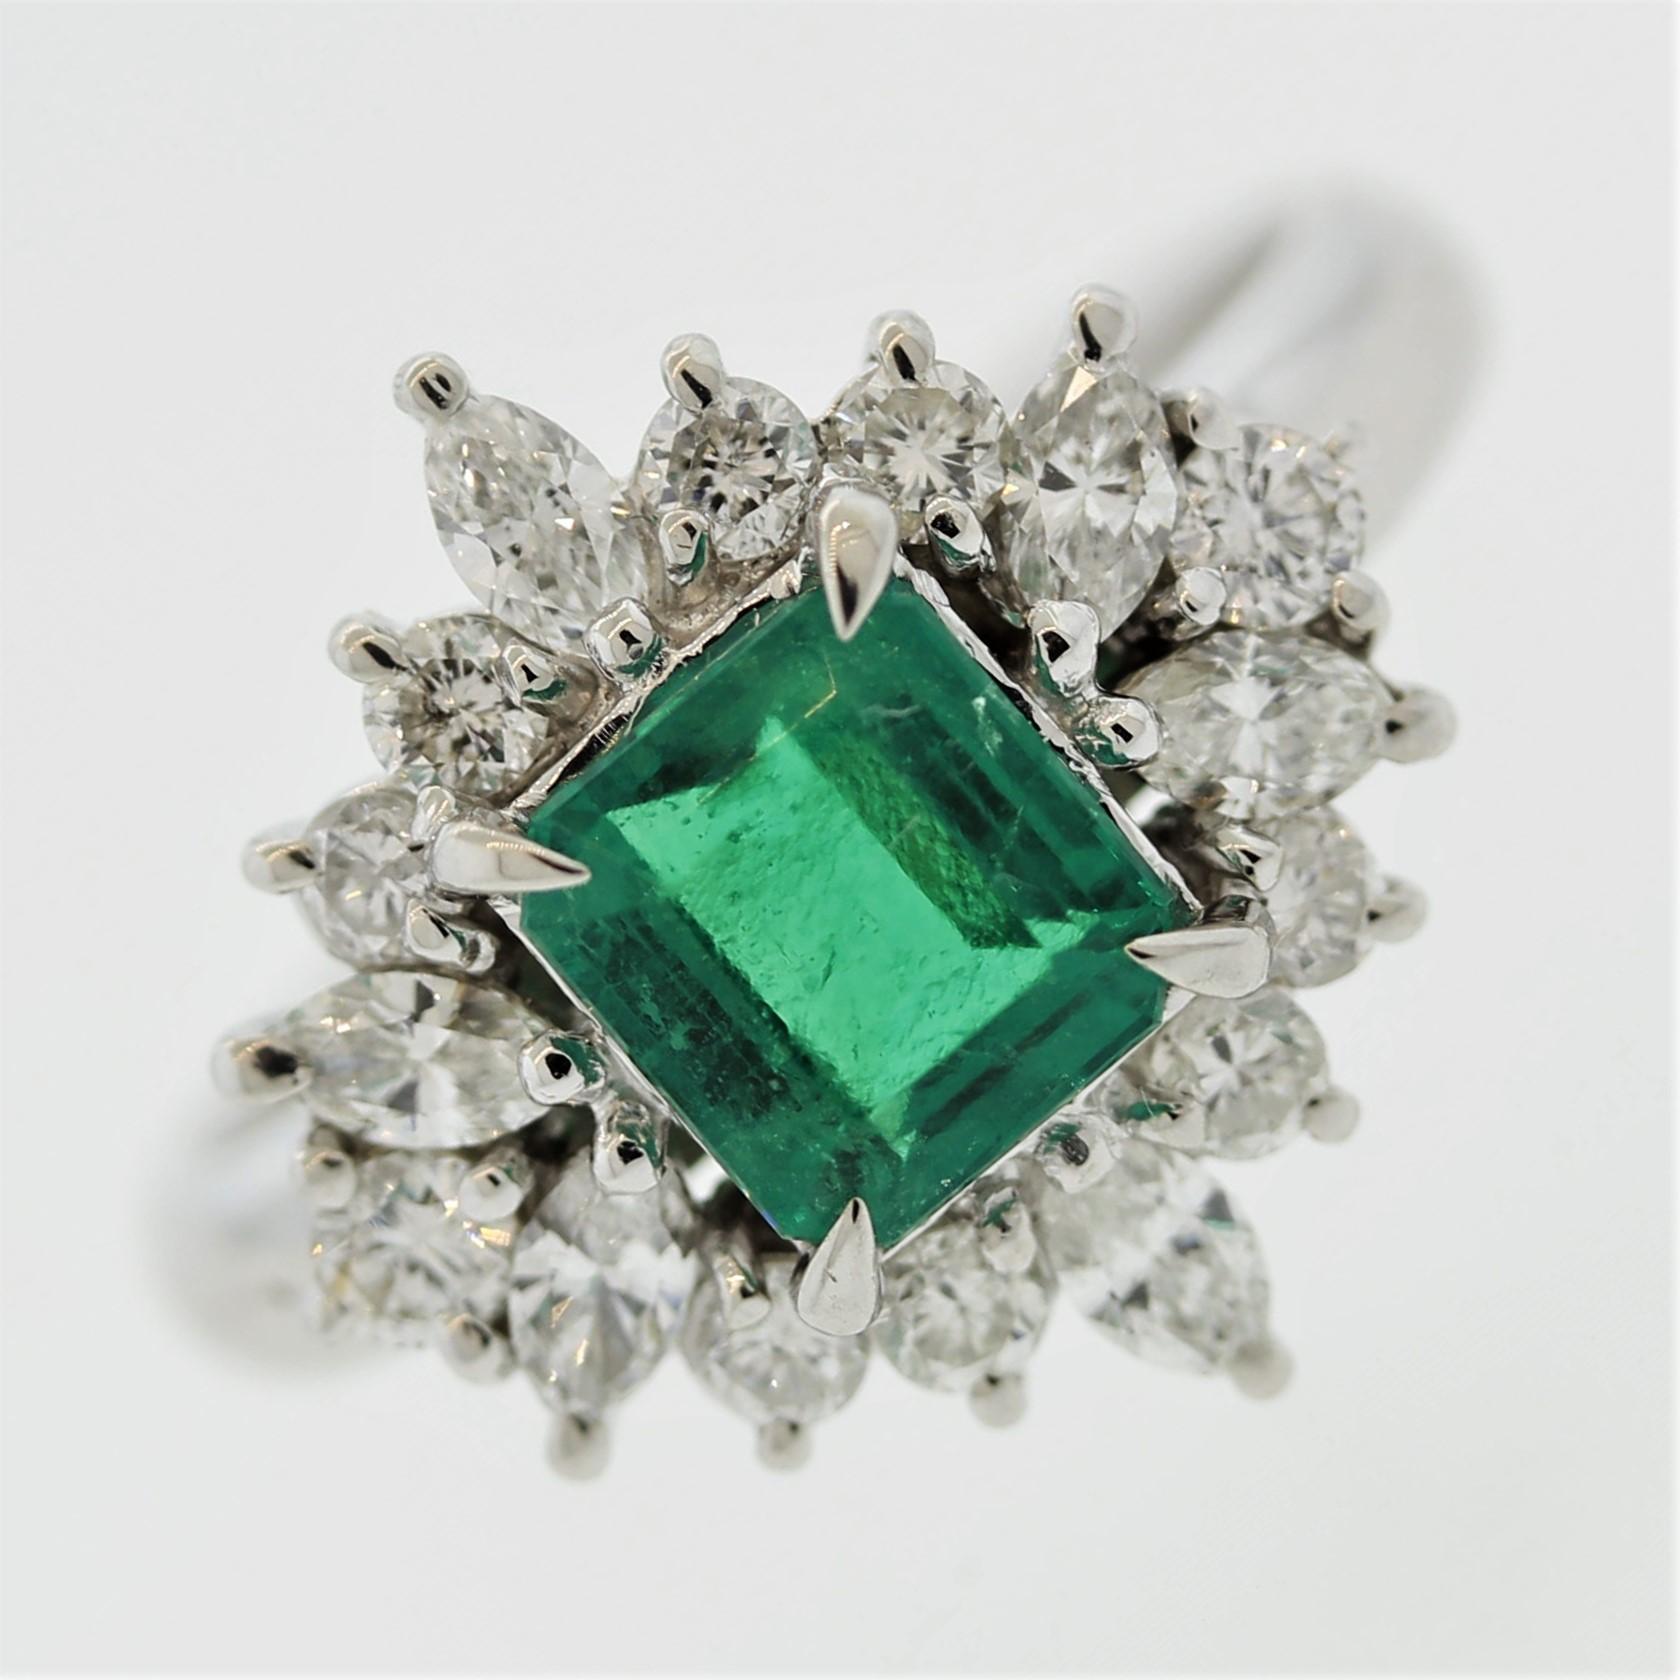 A beautiful and classy ring featuring a fine 1.13 carat emerald. It has a bright vivid green color making us believe it is from Colombia, specifically the Muzo mines. It is accented by 0.82 carats of round brilliant and marquise-cut diamonds.